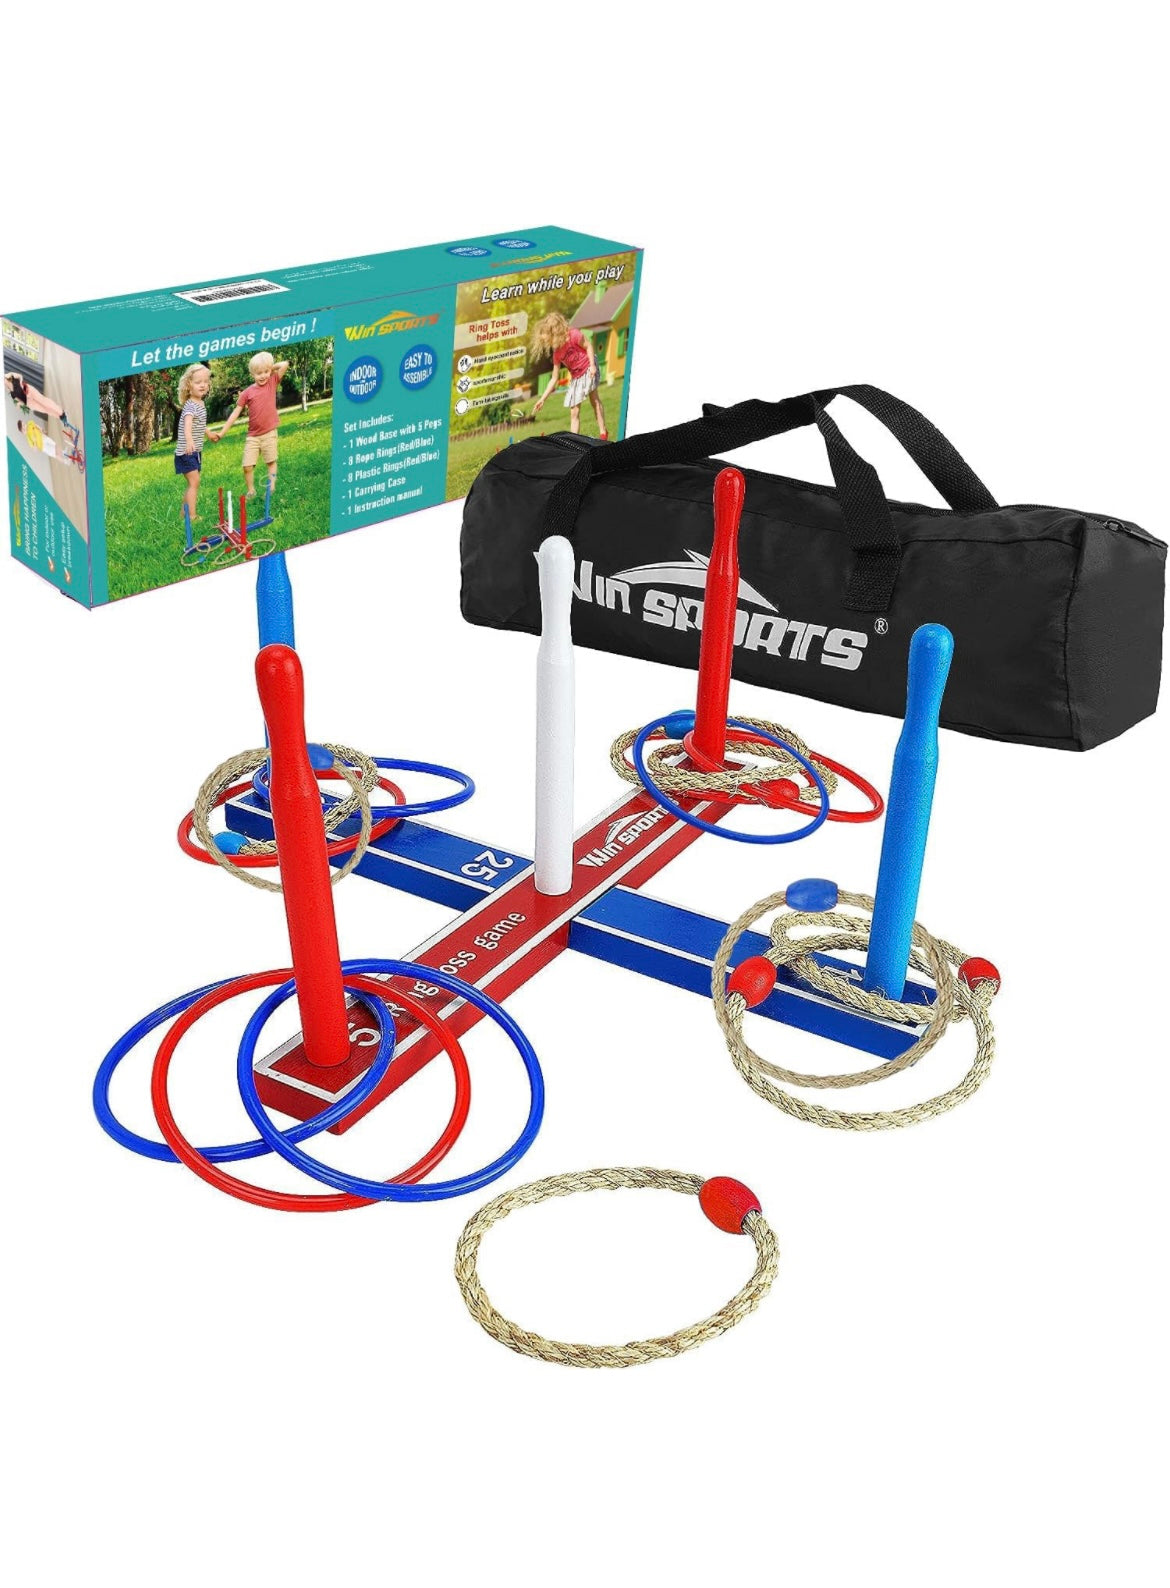 Premium Wooden Ring Toss Game Set - Win SPORTS Throwing Game Indoor Outdoor Games for Kids & Adults,Includes Wood Base,Fun Family or Friends Game